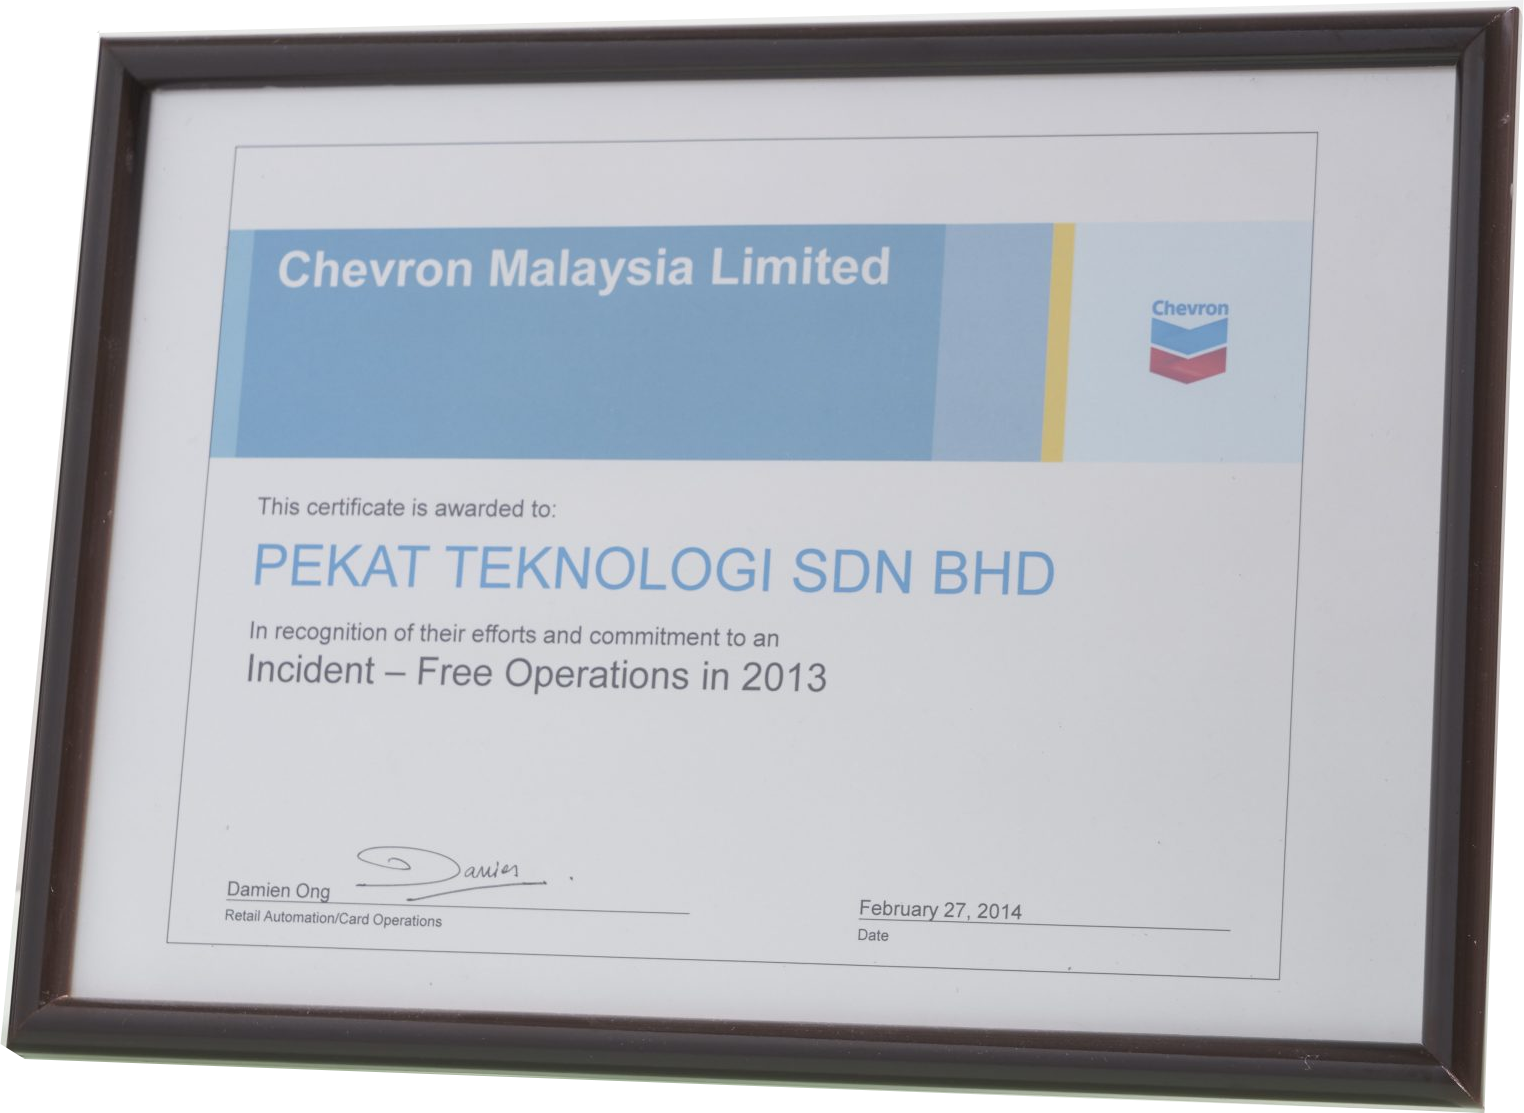 Incident-Free Operations by Chevron Malaysia in 2013